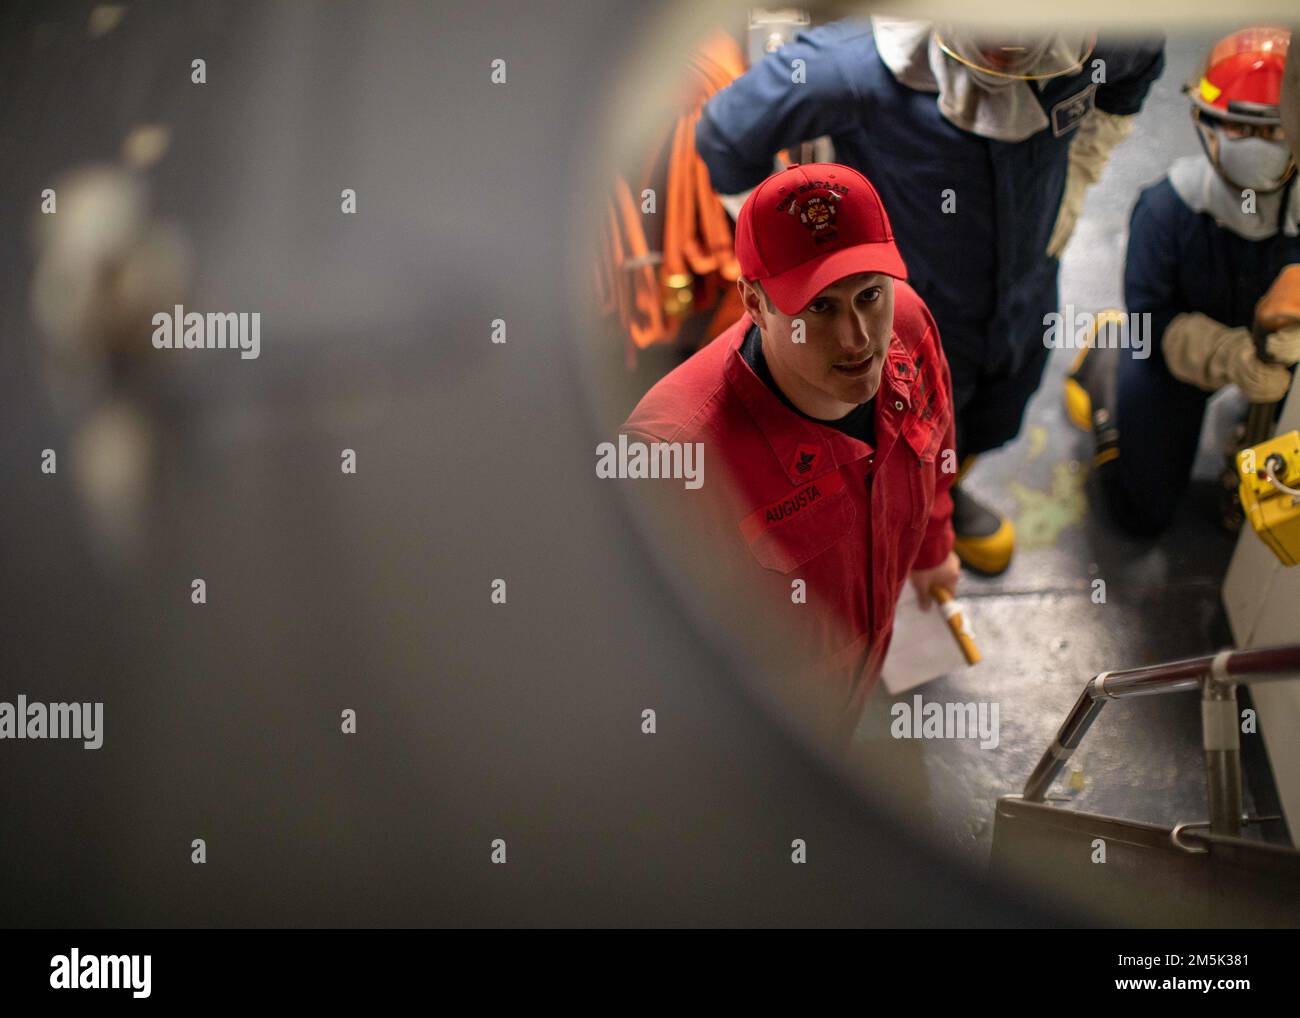 220321-N-AB188-1114  NORFOLK, VA. (March 21, 2022) - Damage Controlman 1st Class Andrew Augusta, assigned to the amphibious assault ship USS Bataan (LHD 5), trains Sailors on damage control procedures during a damage control drill, March 21, 2022. Bataan is homeported at Naval Station Norfolk. Stock Photo